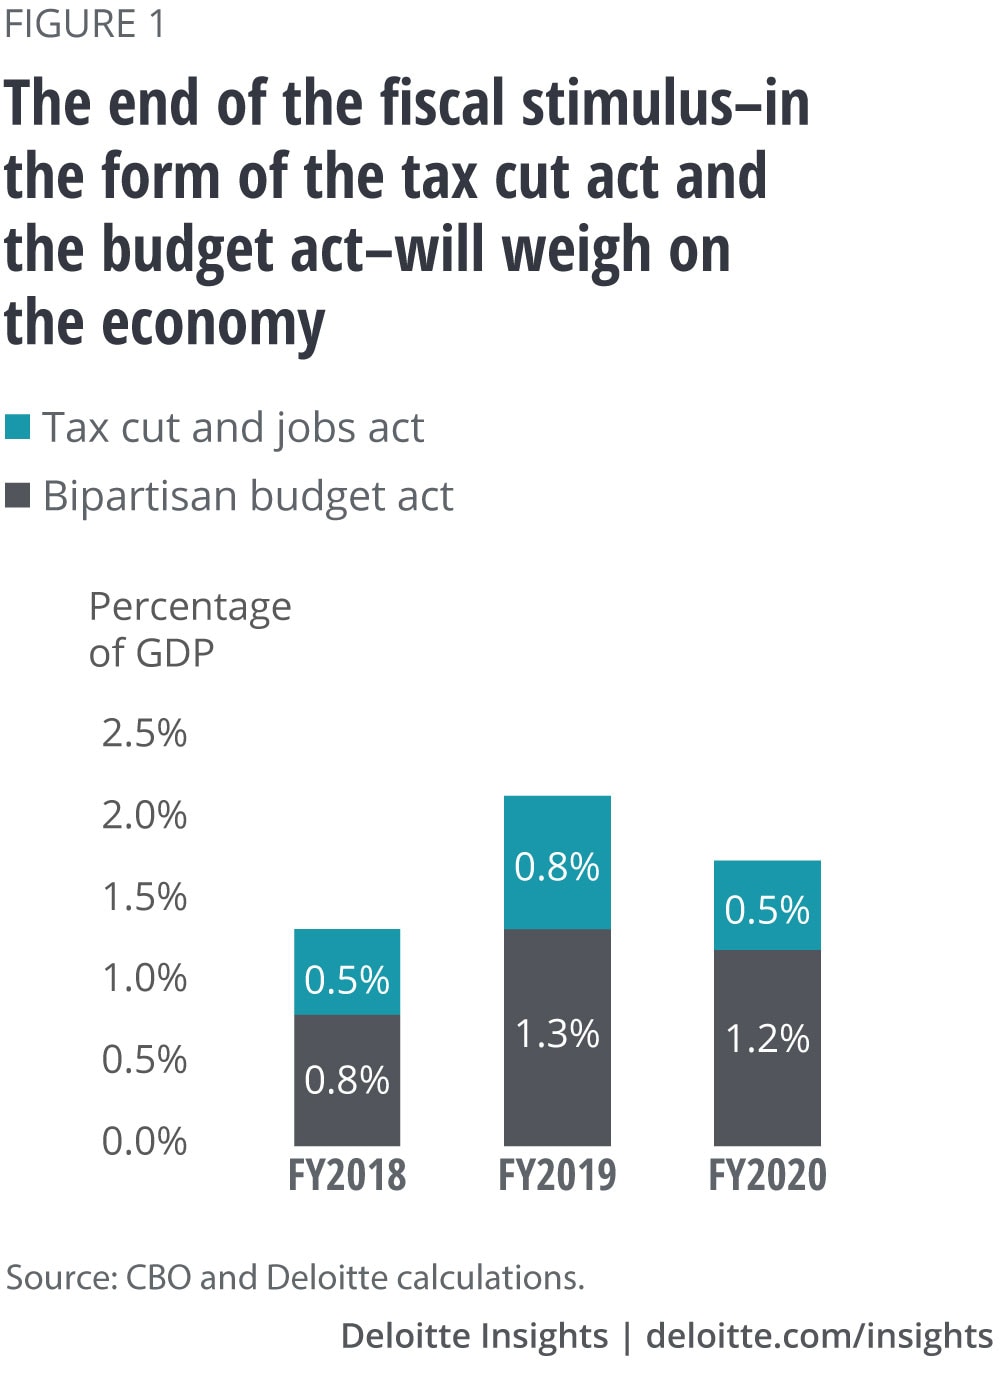 The end of the fiscal stimulus—in the form of the tax cut act and the budget cct—will weigh on the economy